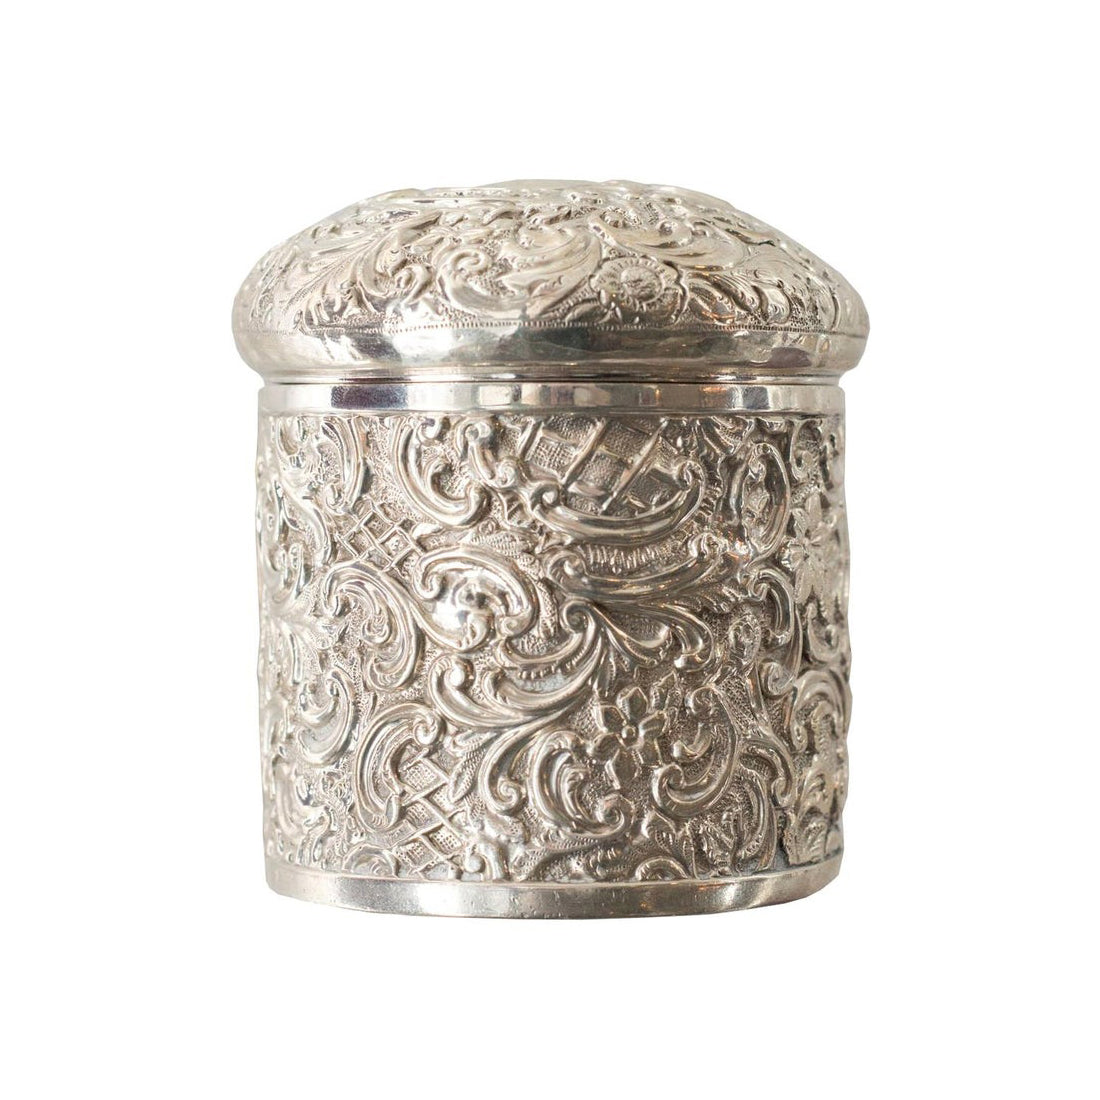 ANTIQUE ENGLISH STERLING SILVER CONTAINER WITH A LID